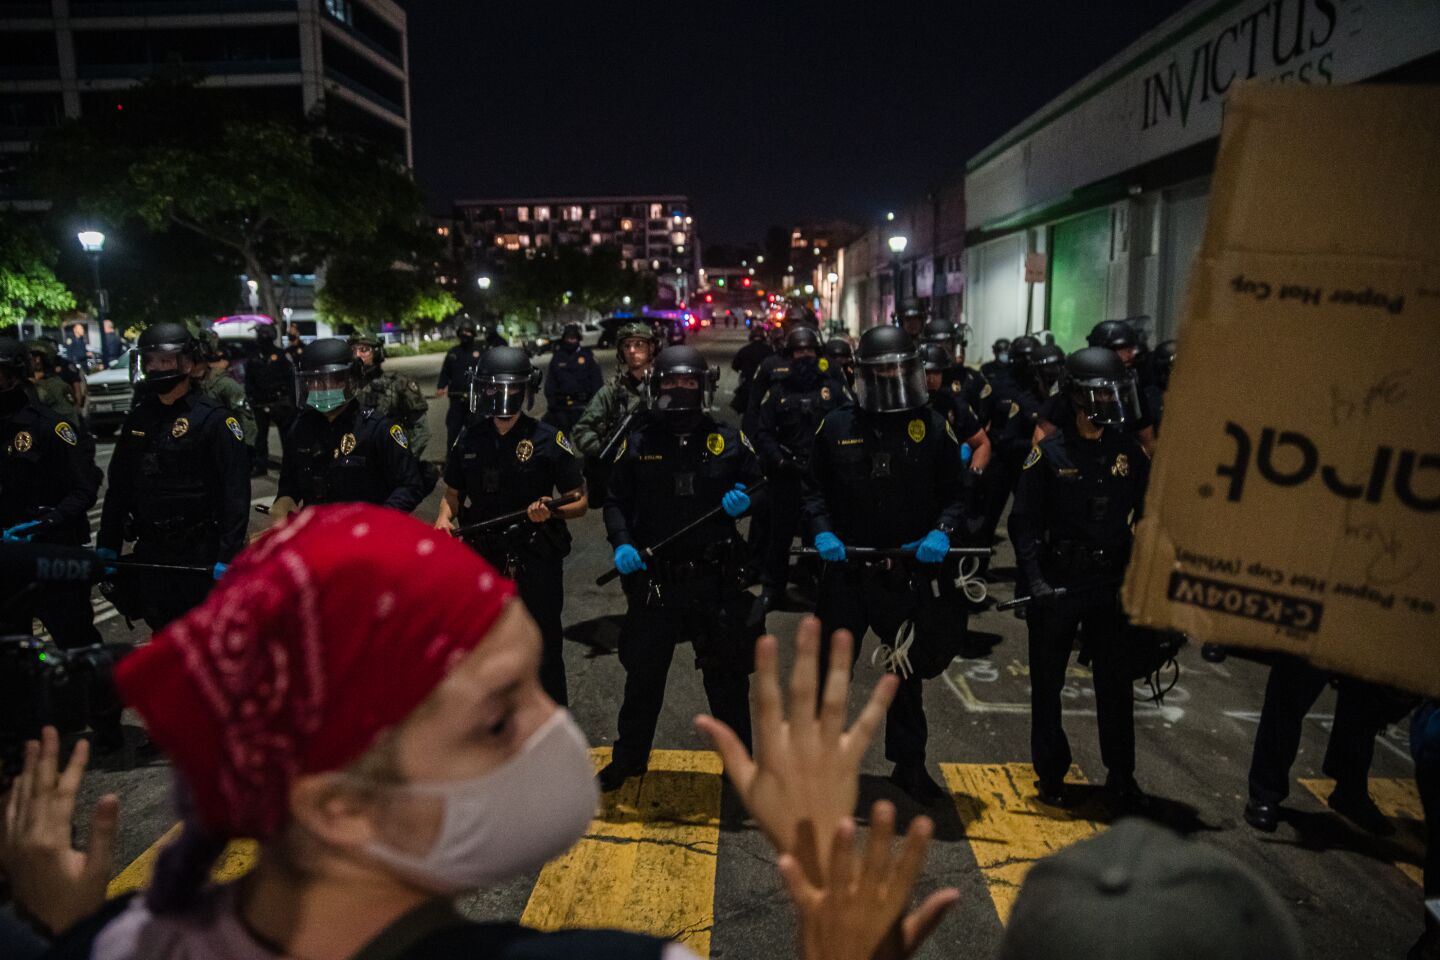 Protesters and police officers stood off late into the night in front of the San Diego Police Department on September 23, 2020.